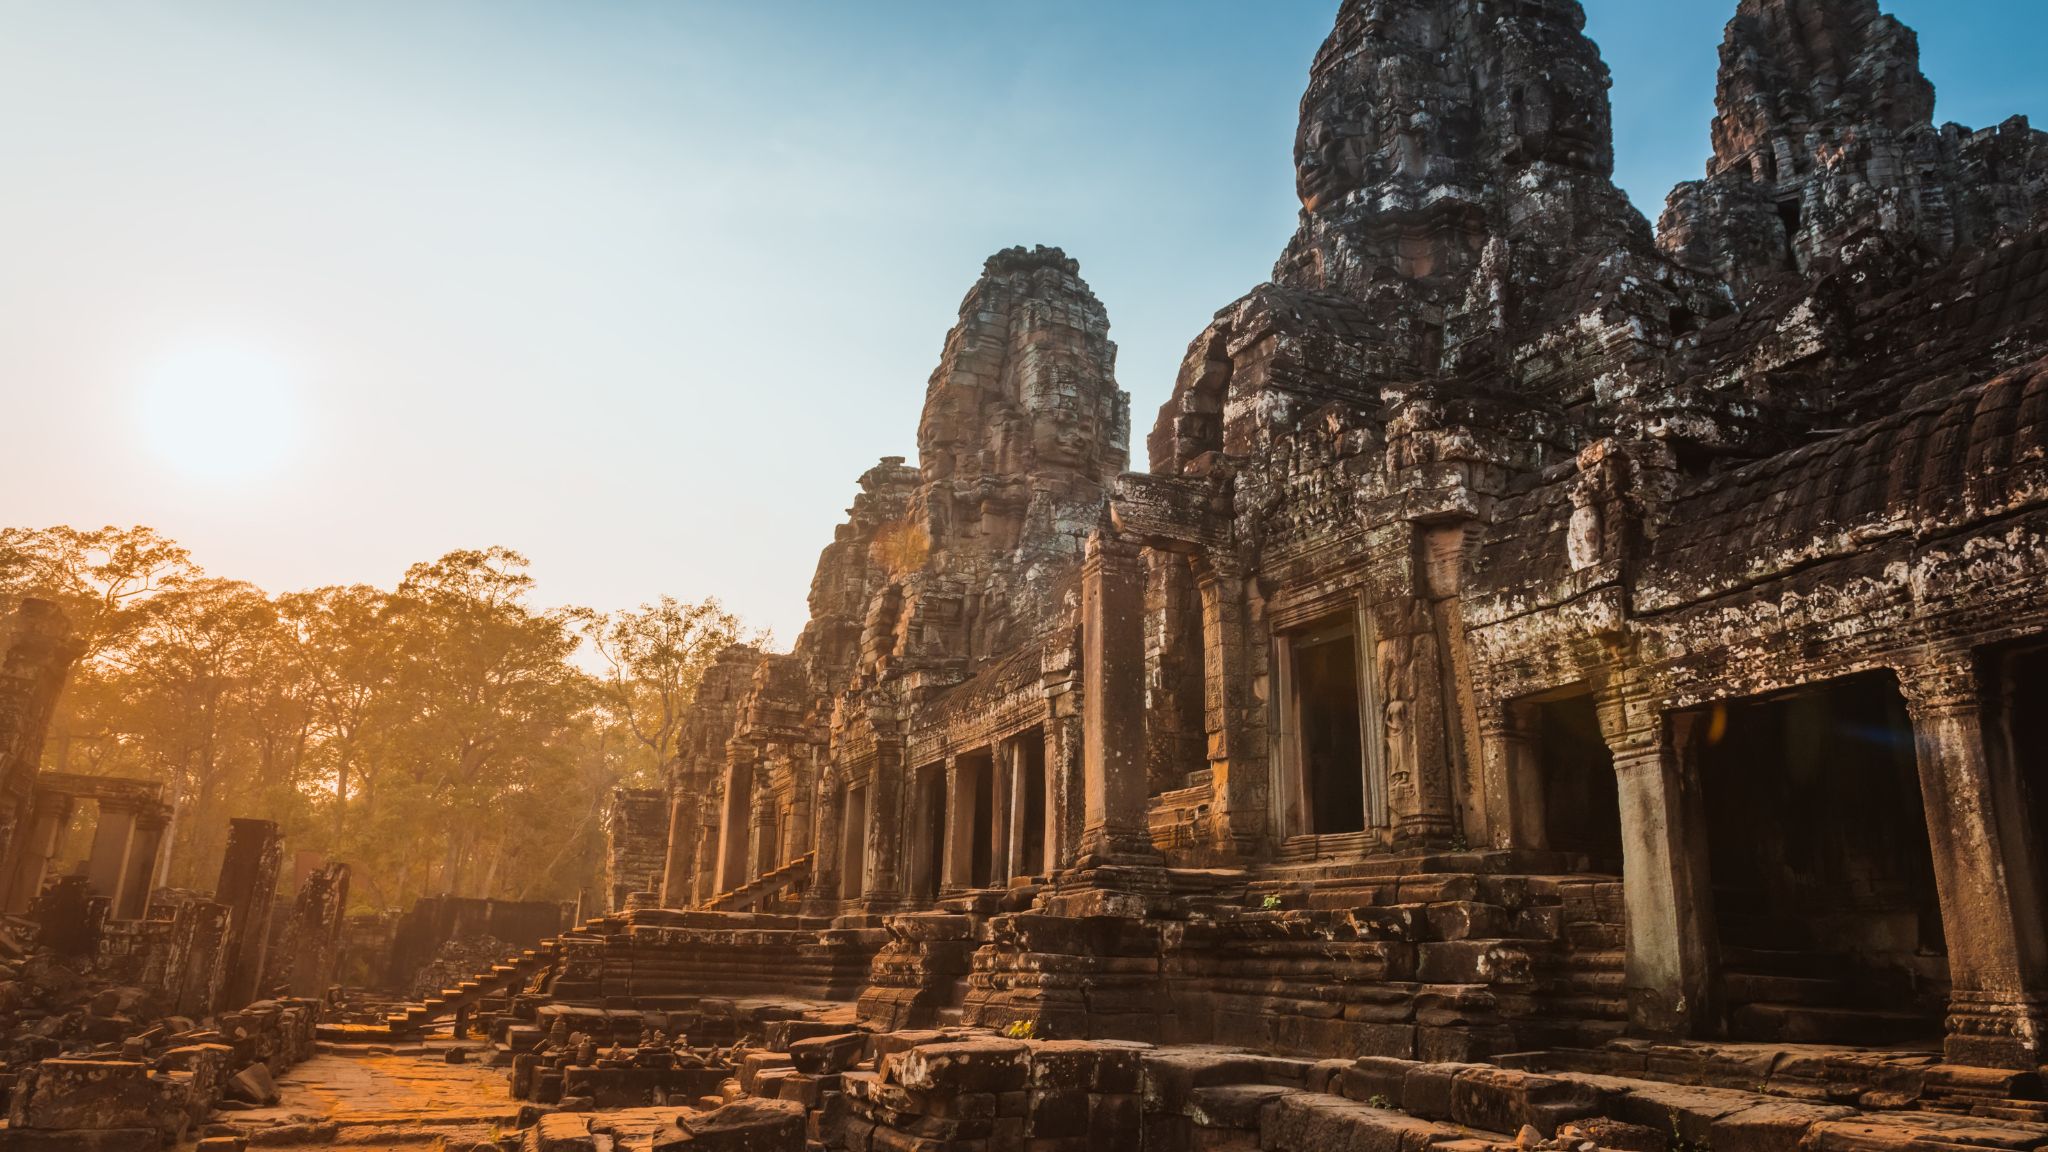 Bayon Temple The Temple With Distinctive Khmer Architecture